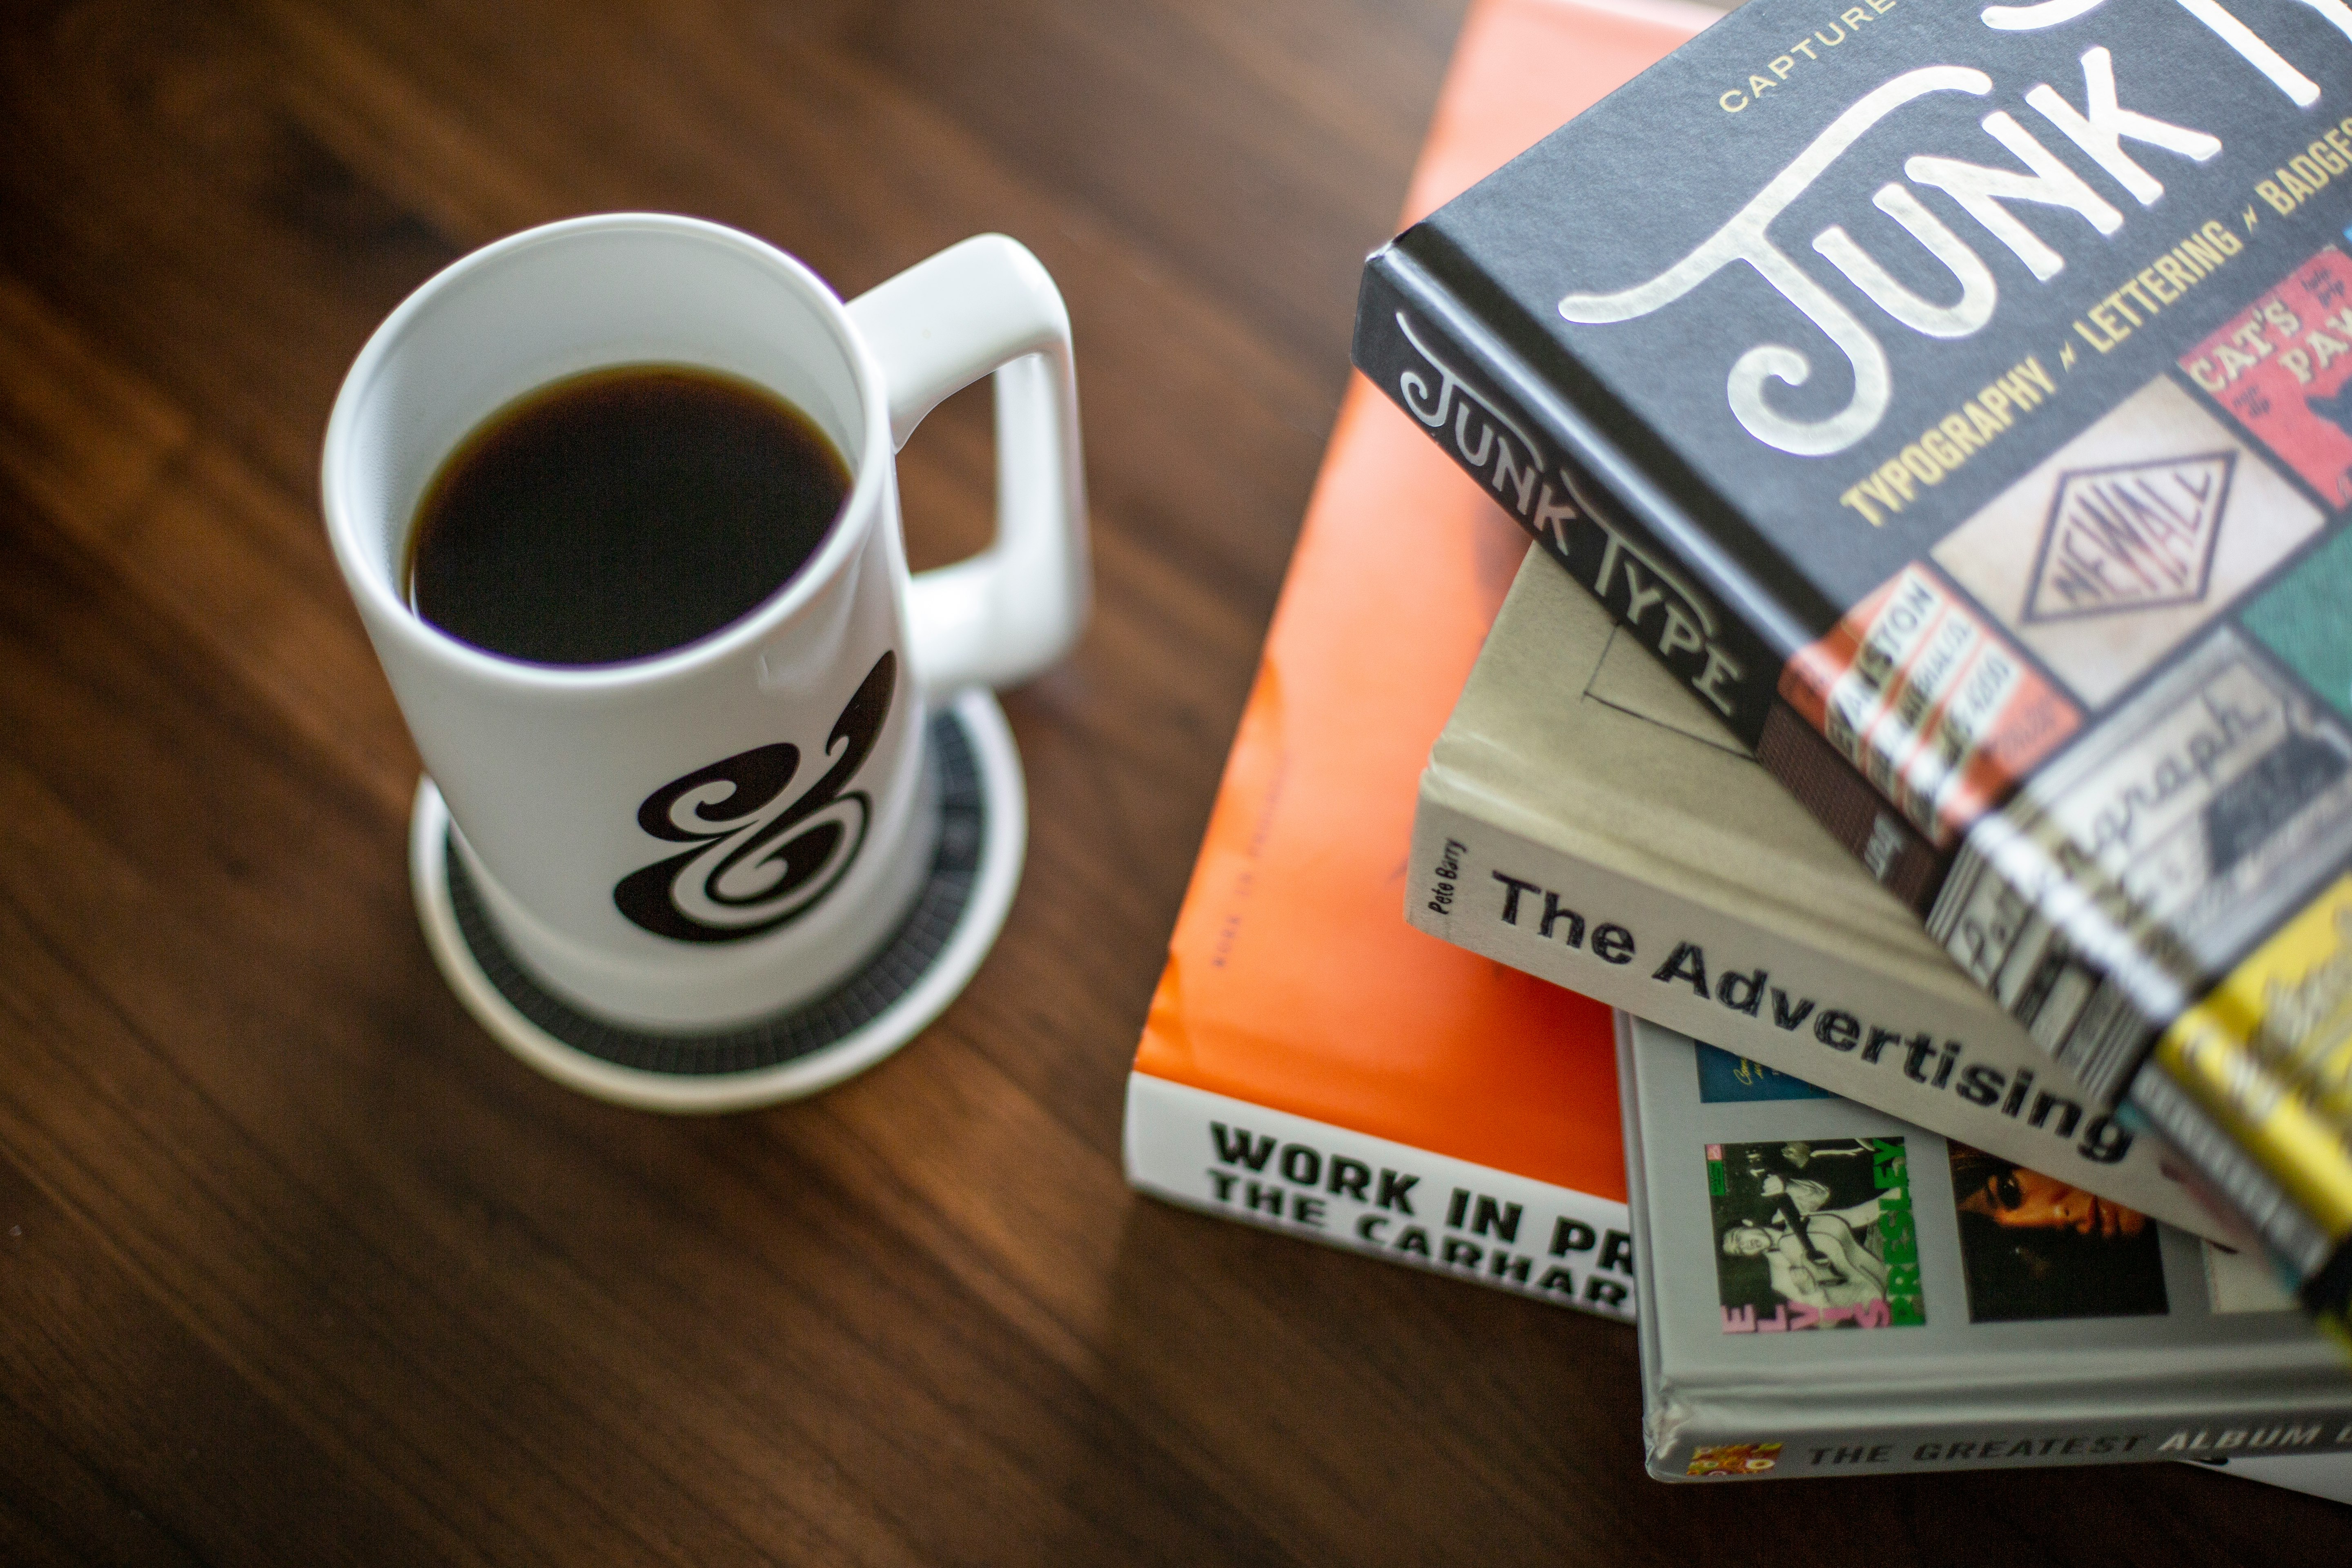 white and black coffee mug near pile of books on brown wooden surface